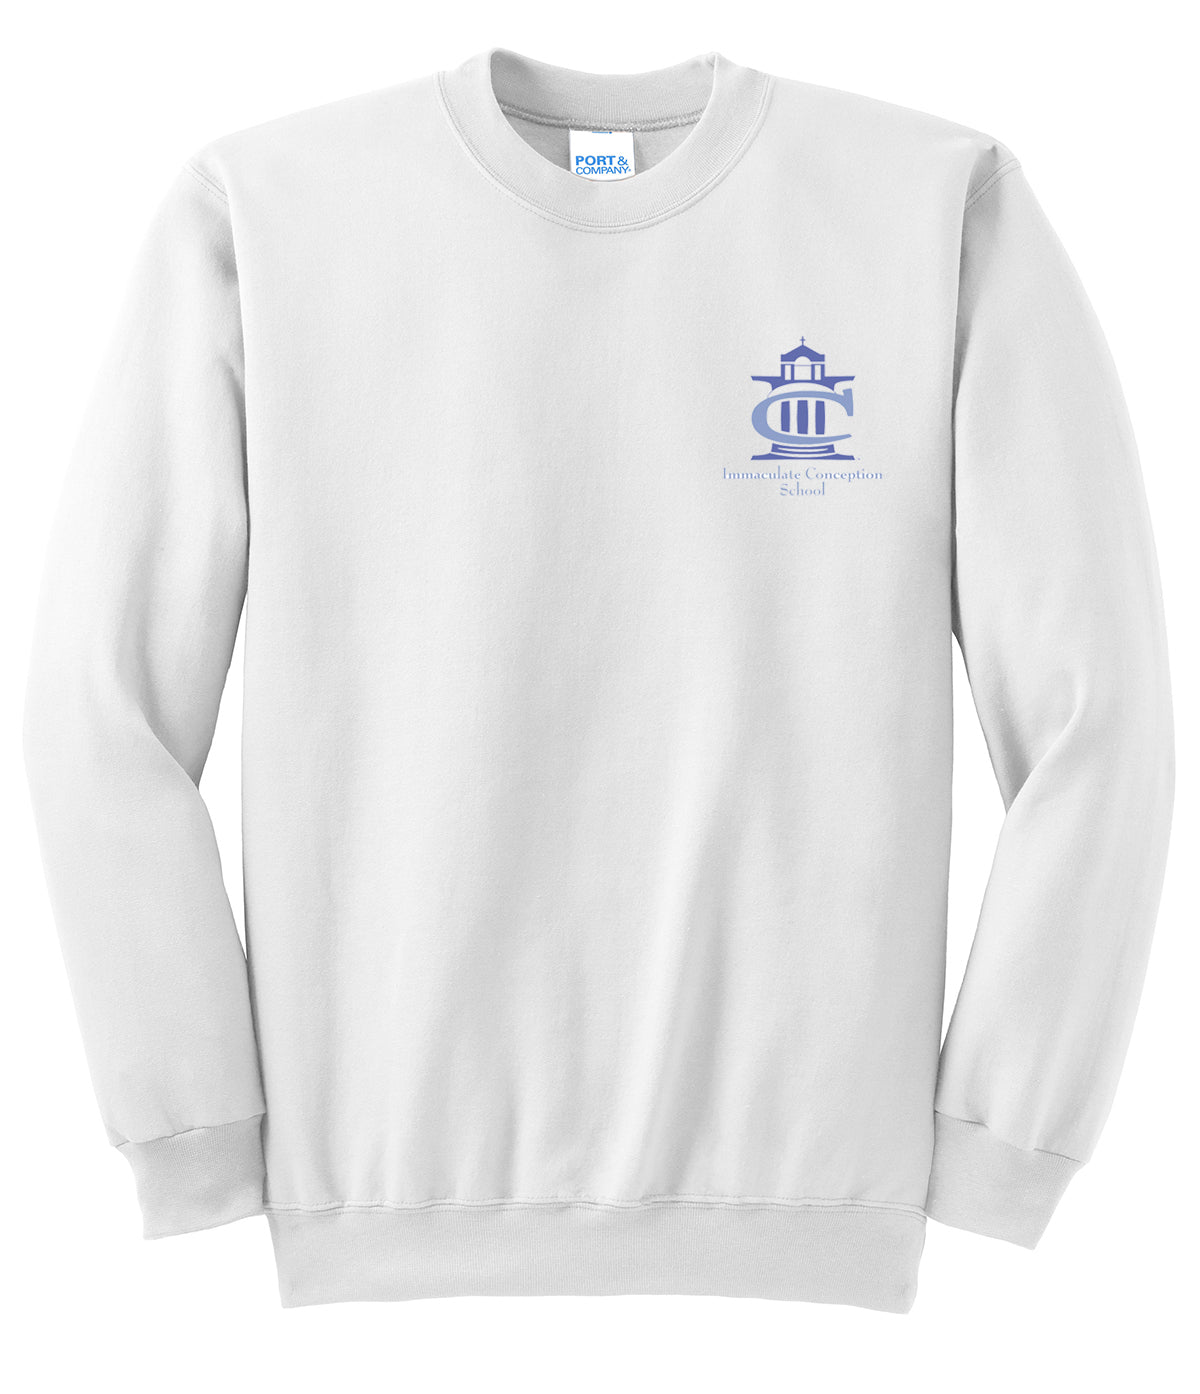 Youth Crewneck Sweatshirt With Immaculate Conception Fort Smith Logo